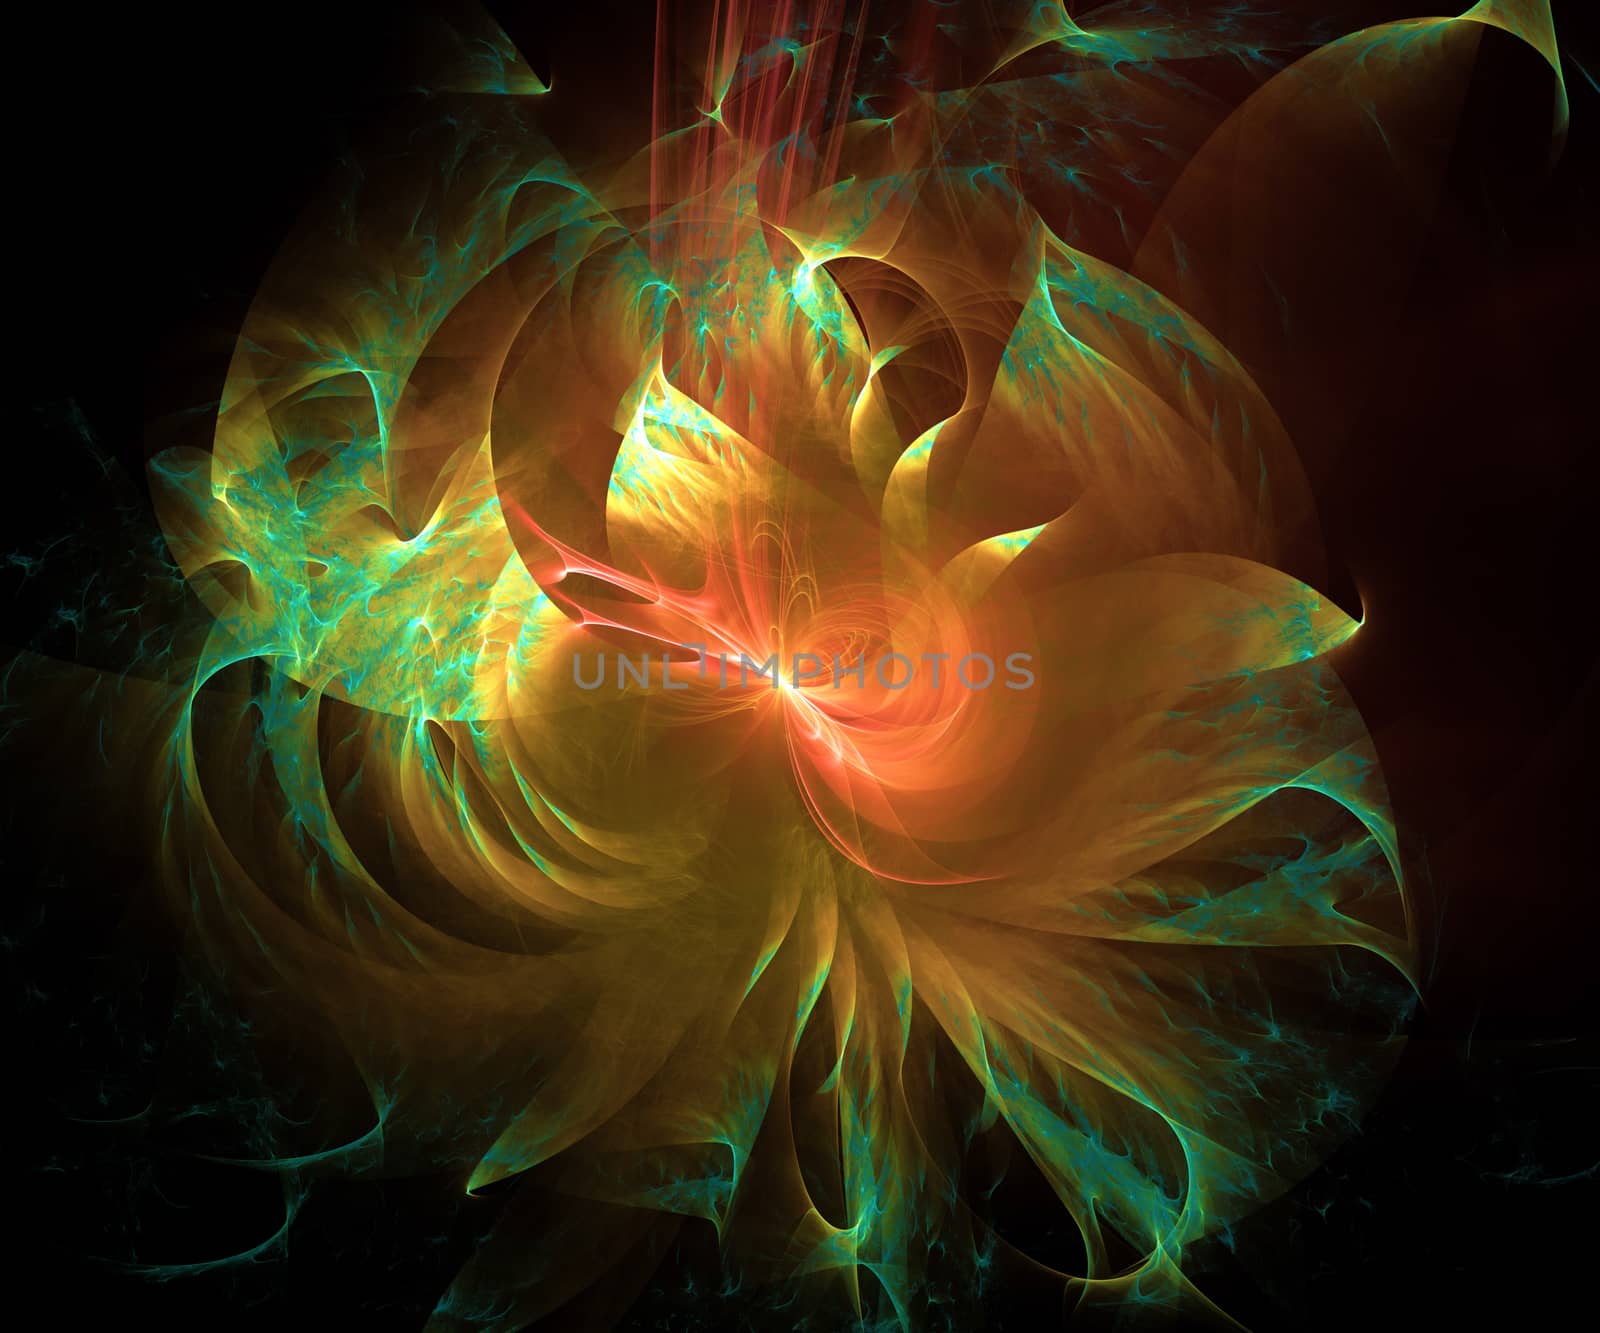 Computer generated fractal artwork for creative art,design and entertainment